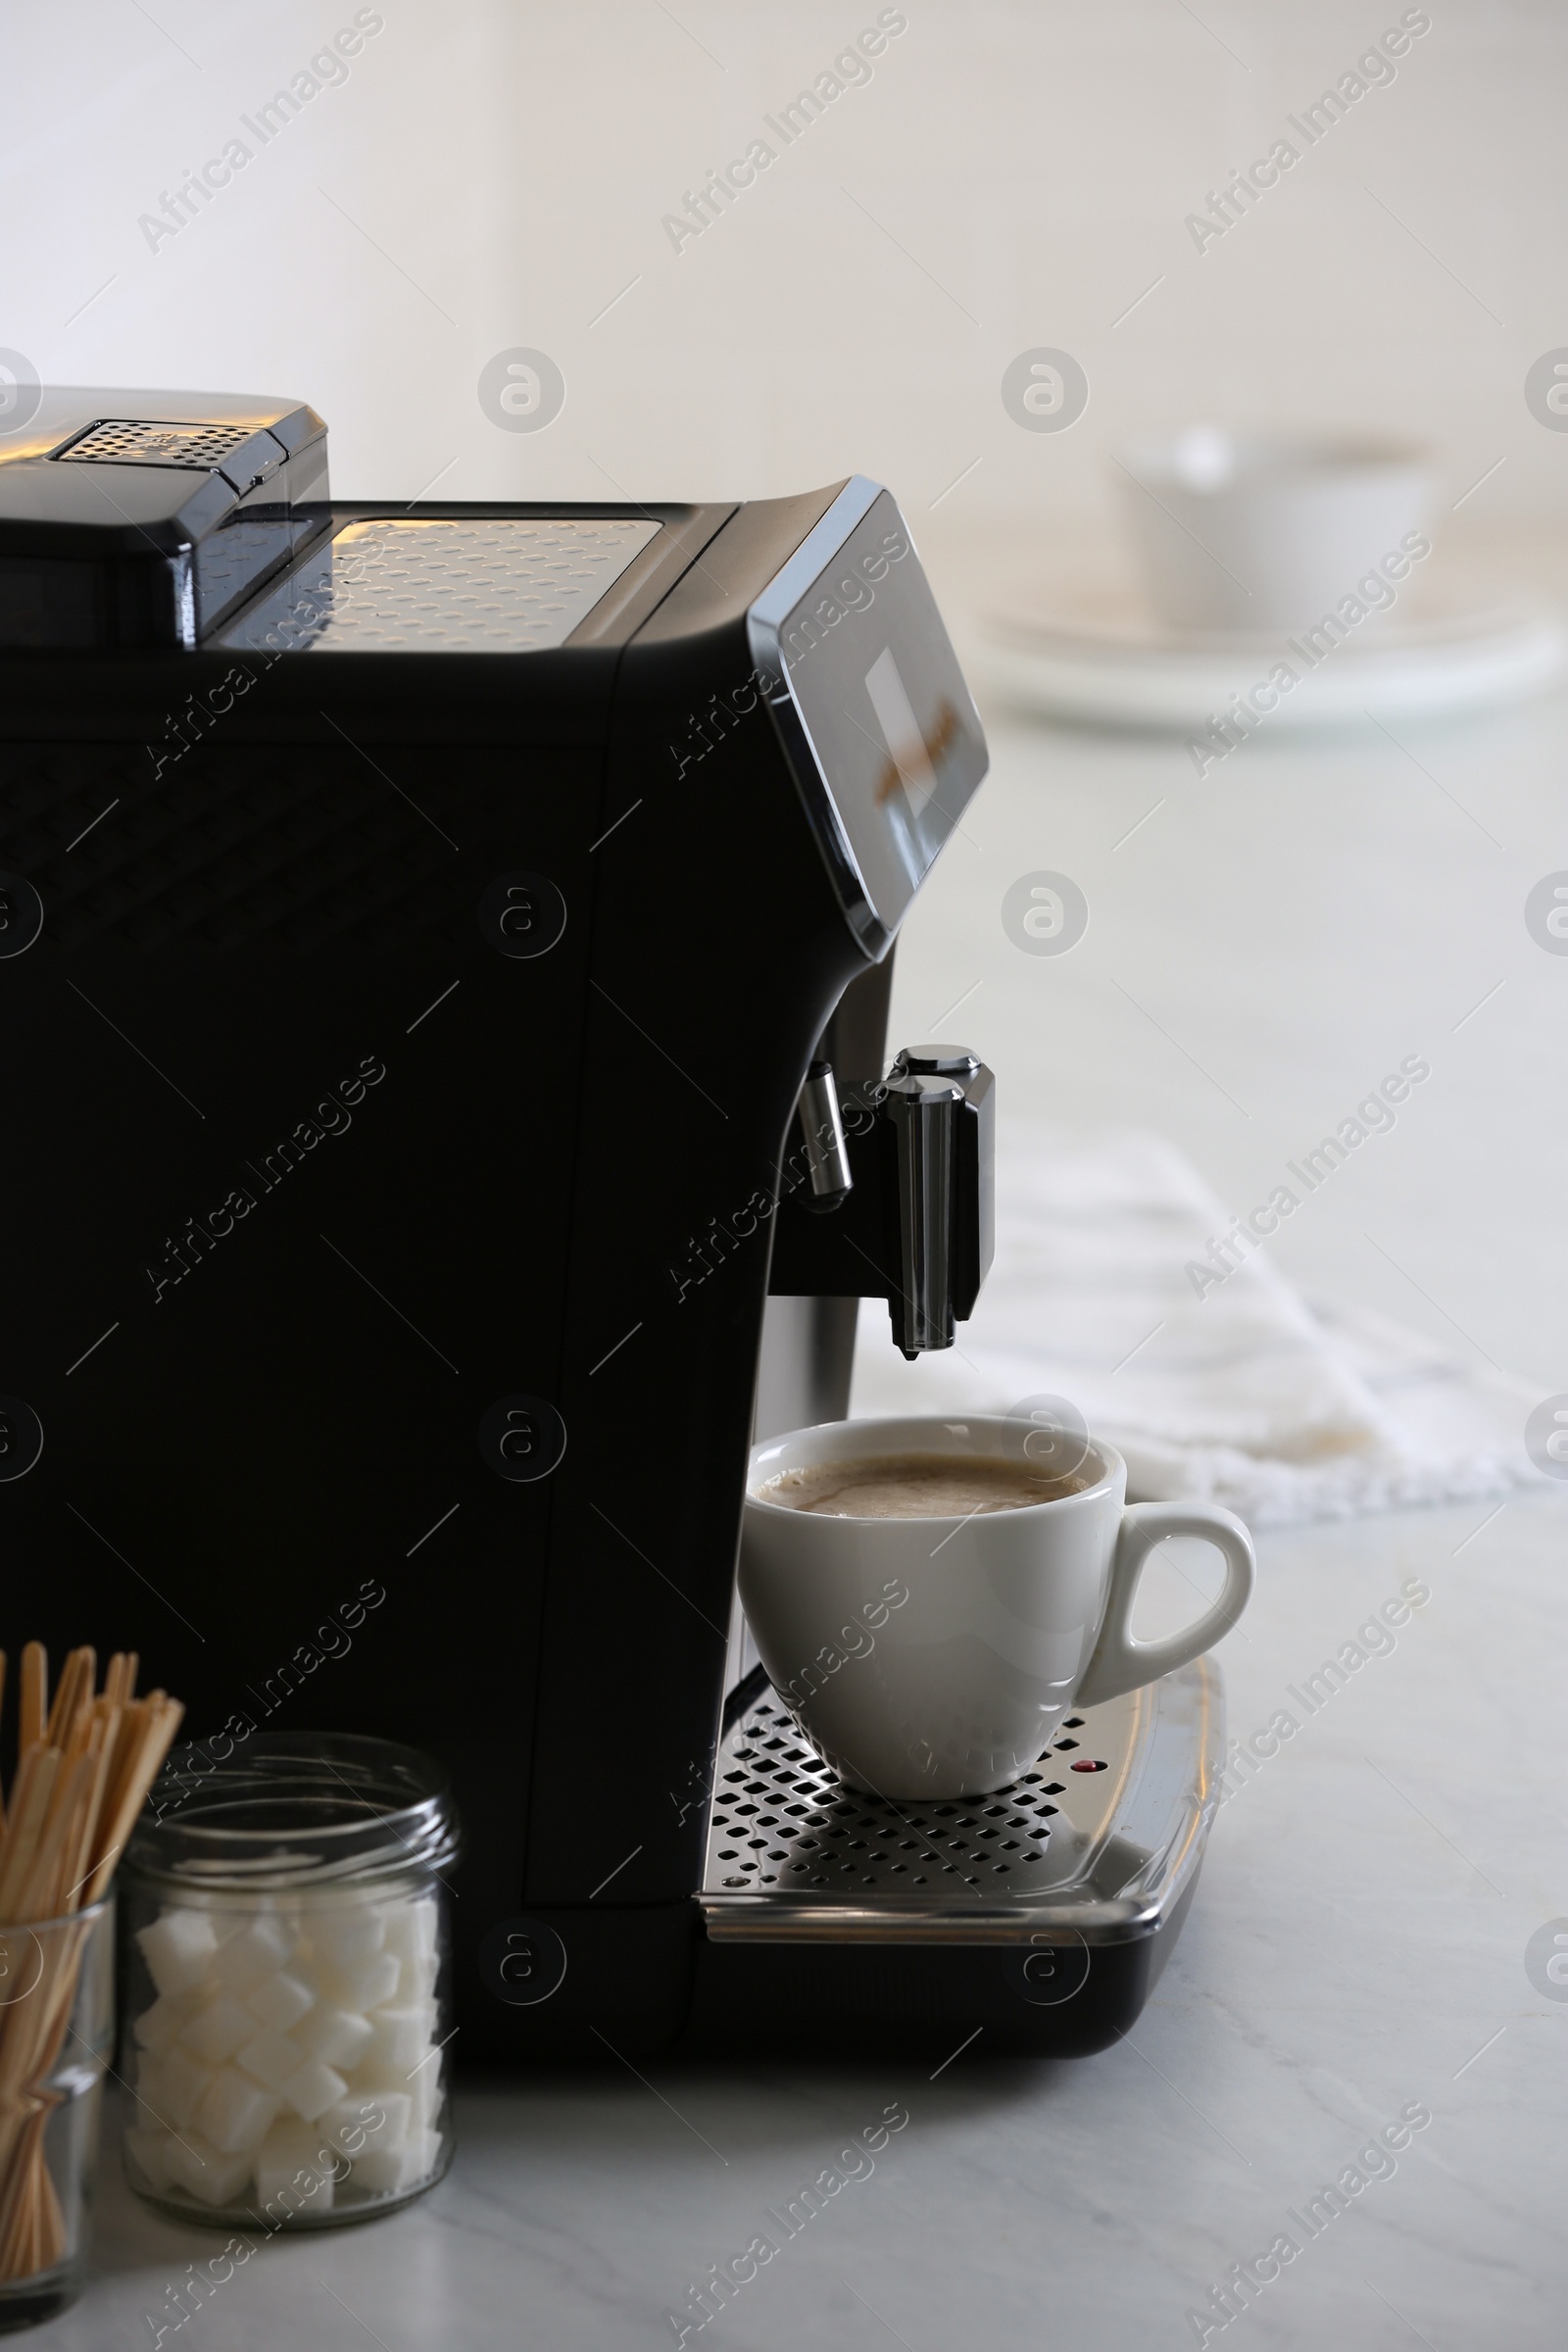 Photo of Modern electric espresso machine with cup of coffee on white marble countertop in kitchen